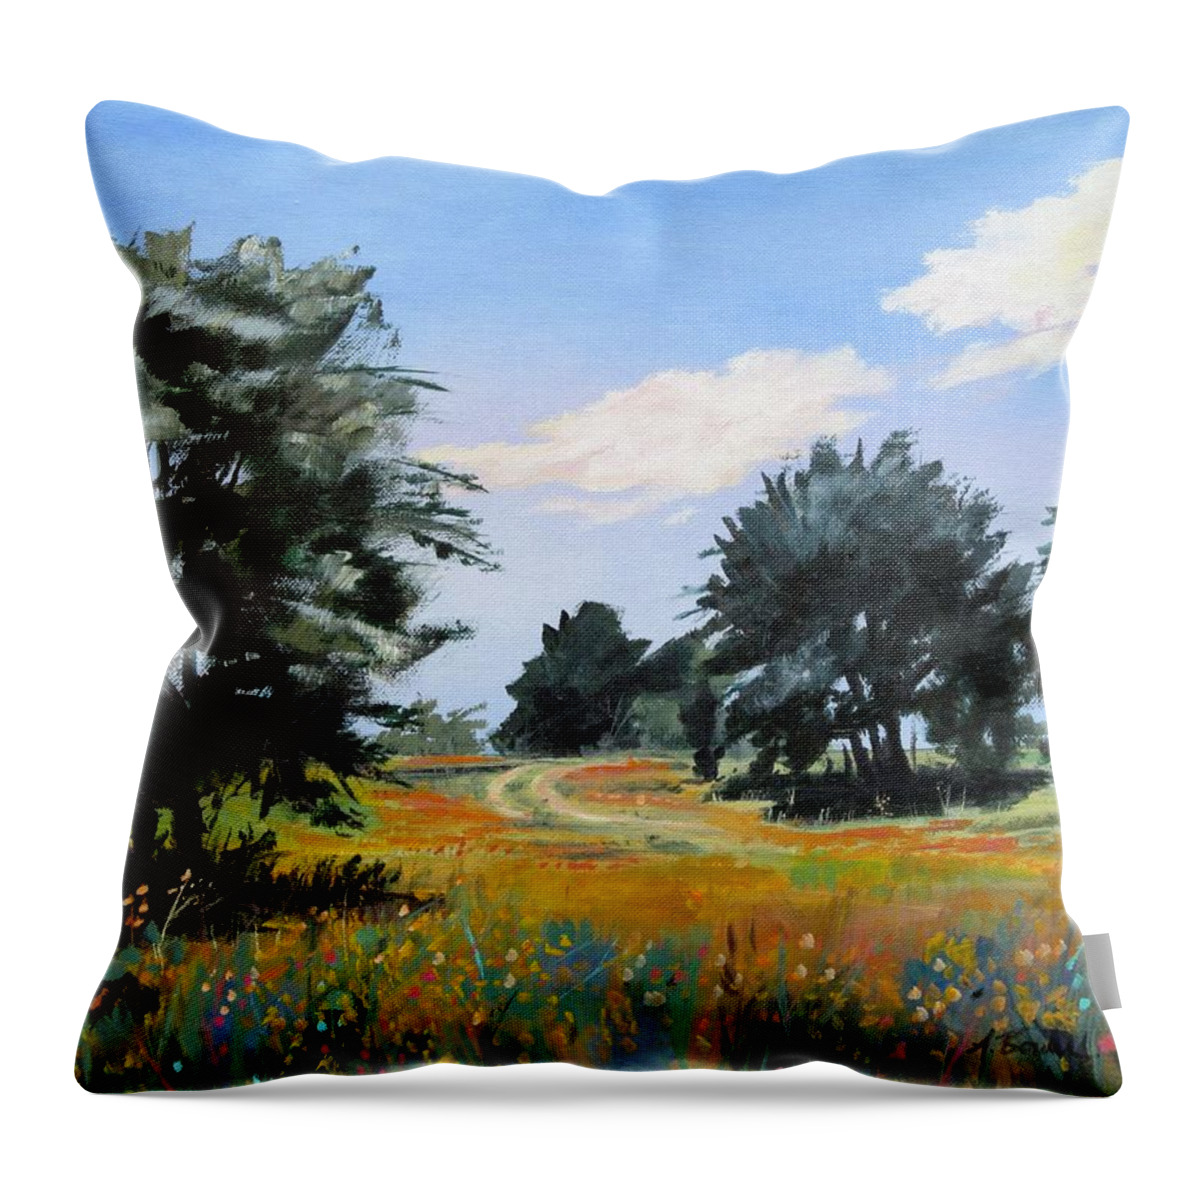 Texas Landscape Throw Pillow featuring the painting Ranch Road Near Bandera Texas by Adele Bower